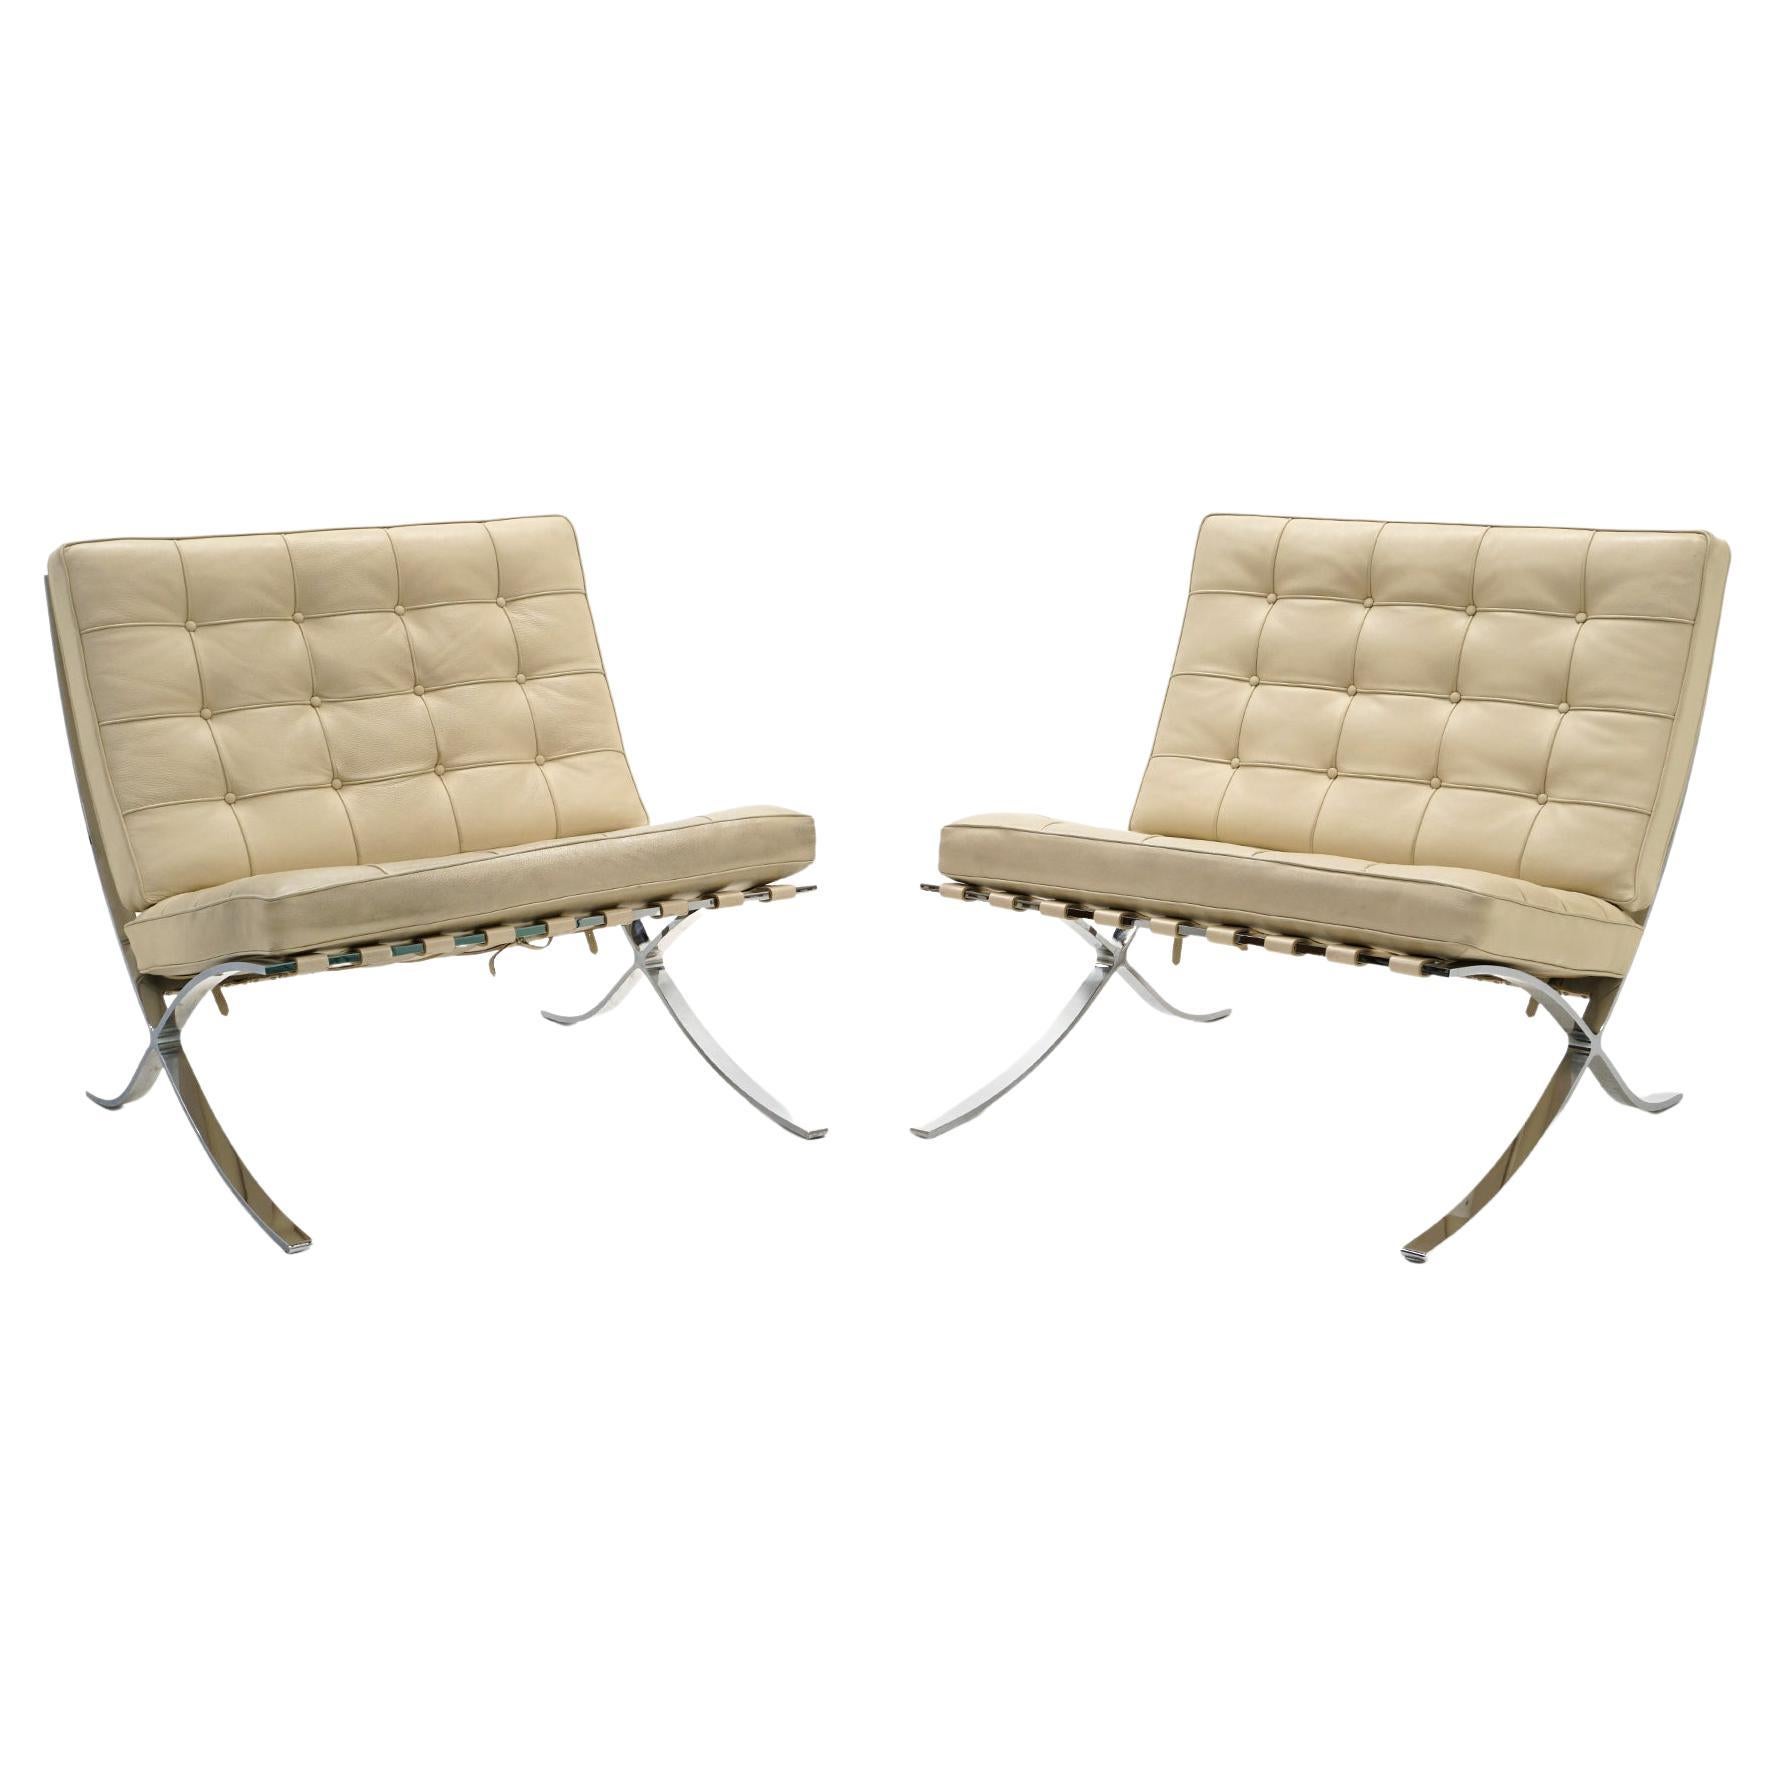 Pair White Leather Barcelona Chairs, Chromed Steel Frames, Authentic, Original